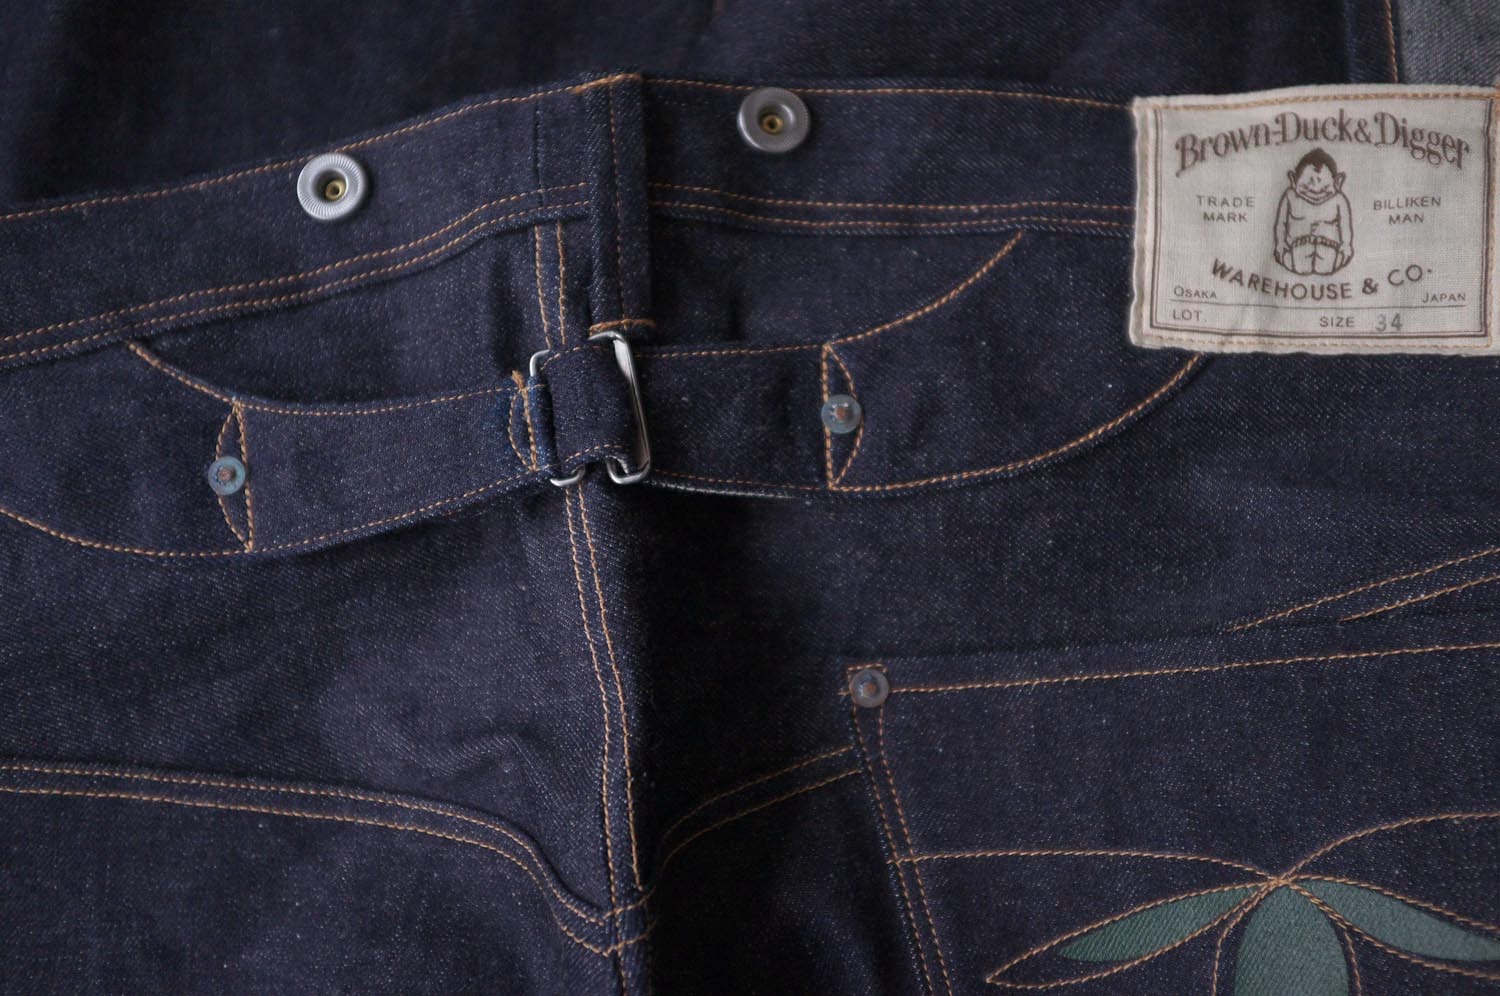 Brown-Duck & Digger - Jeans Just As They Ought To Be - New Utility